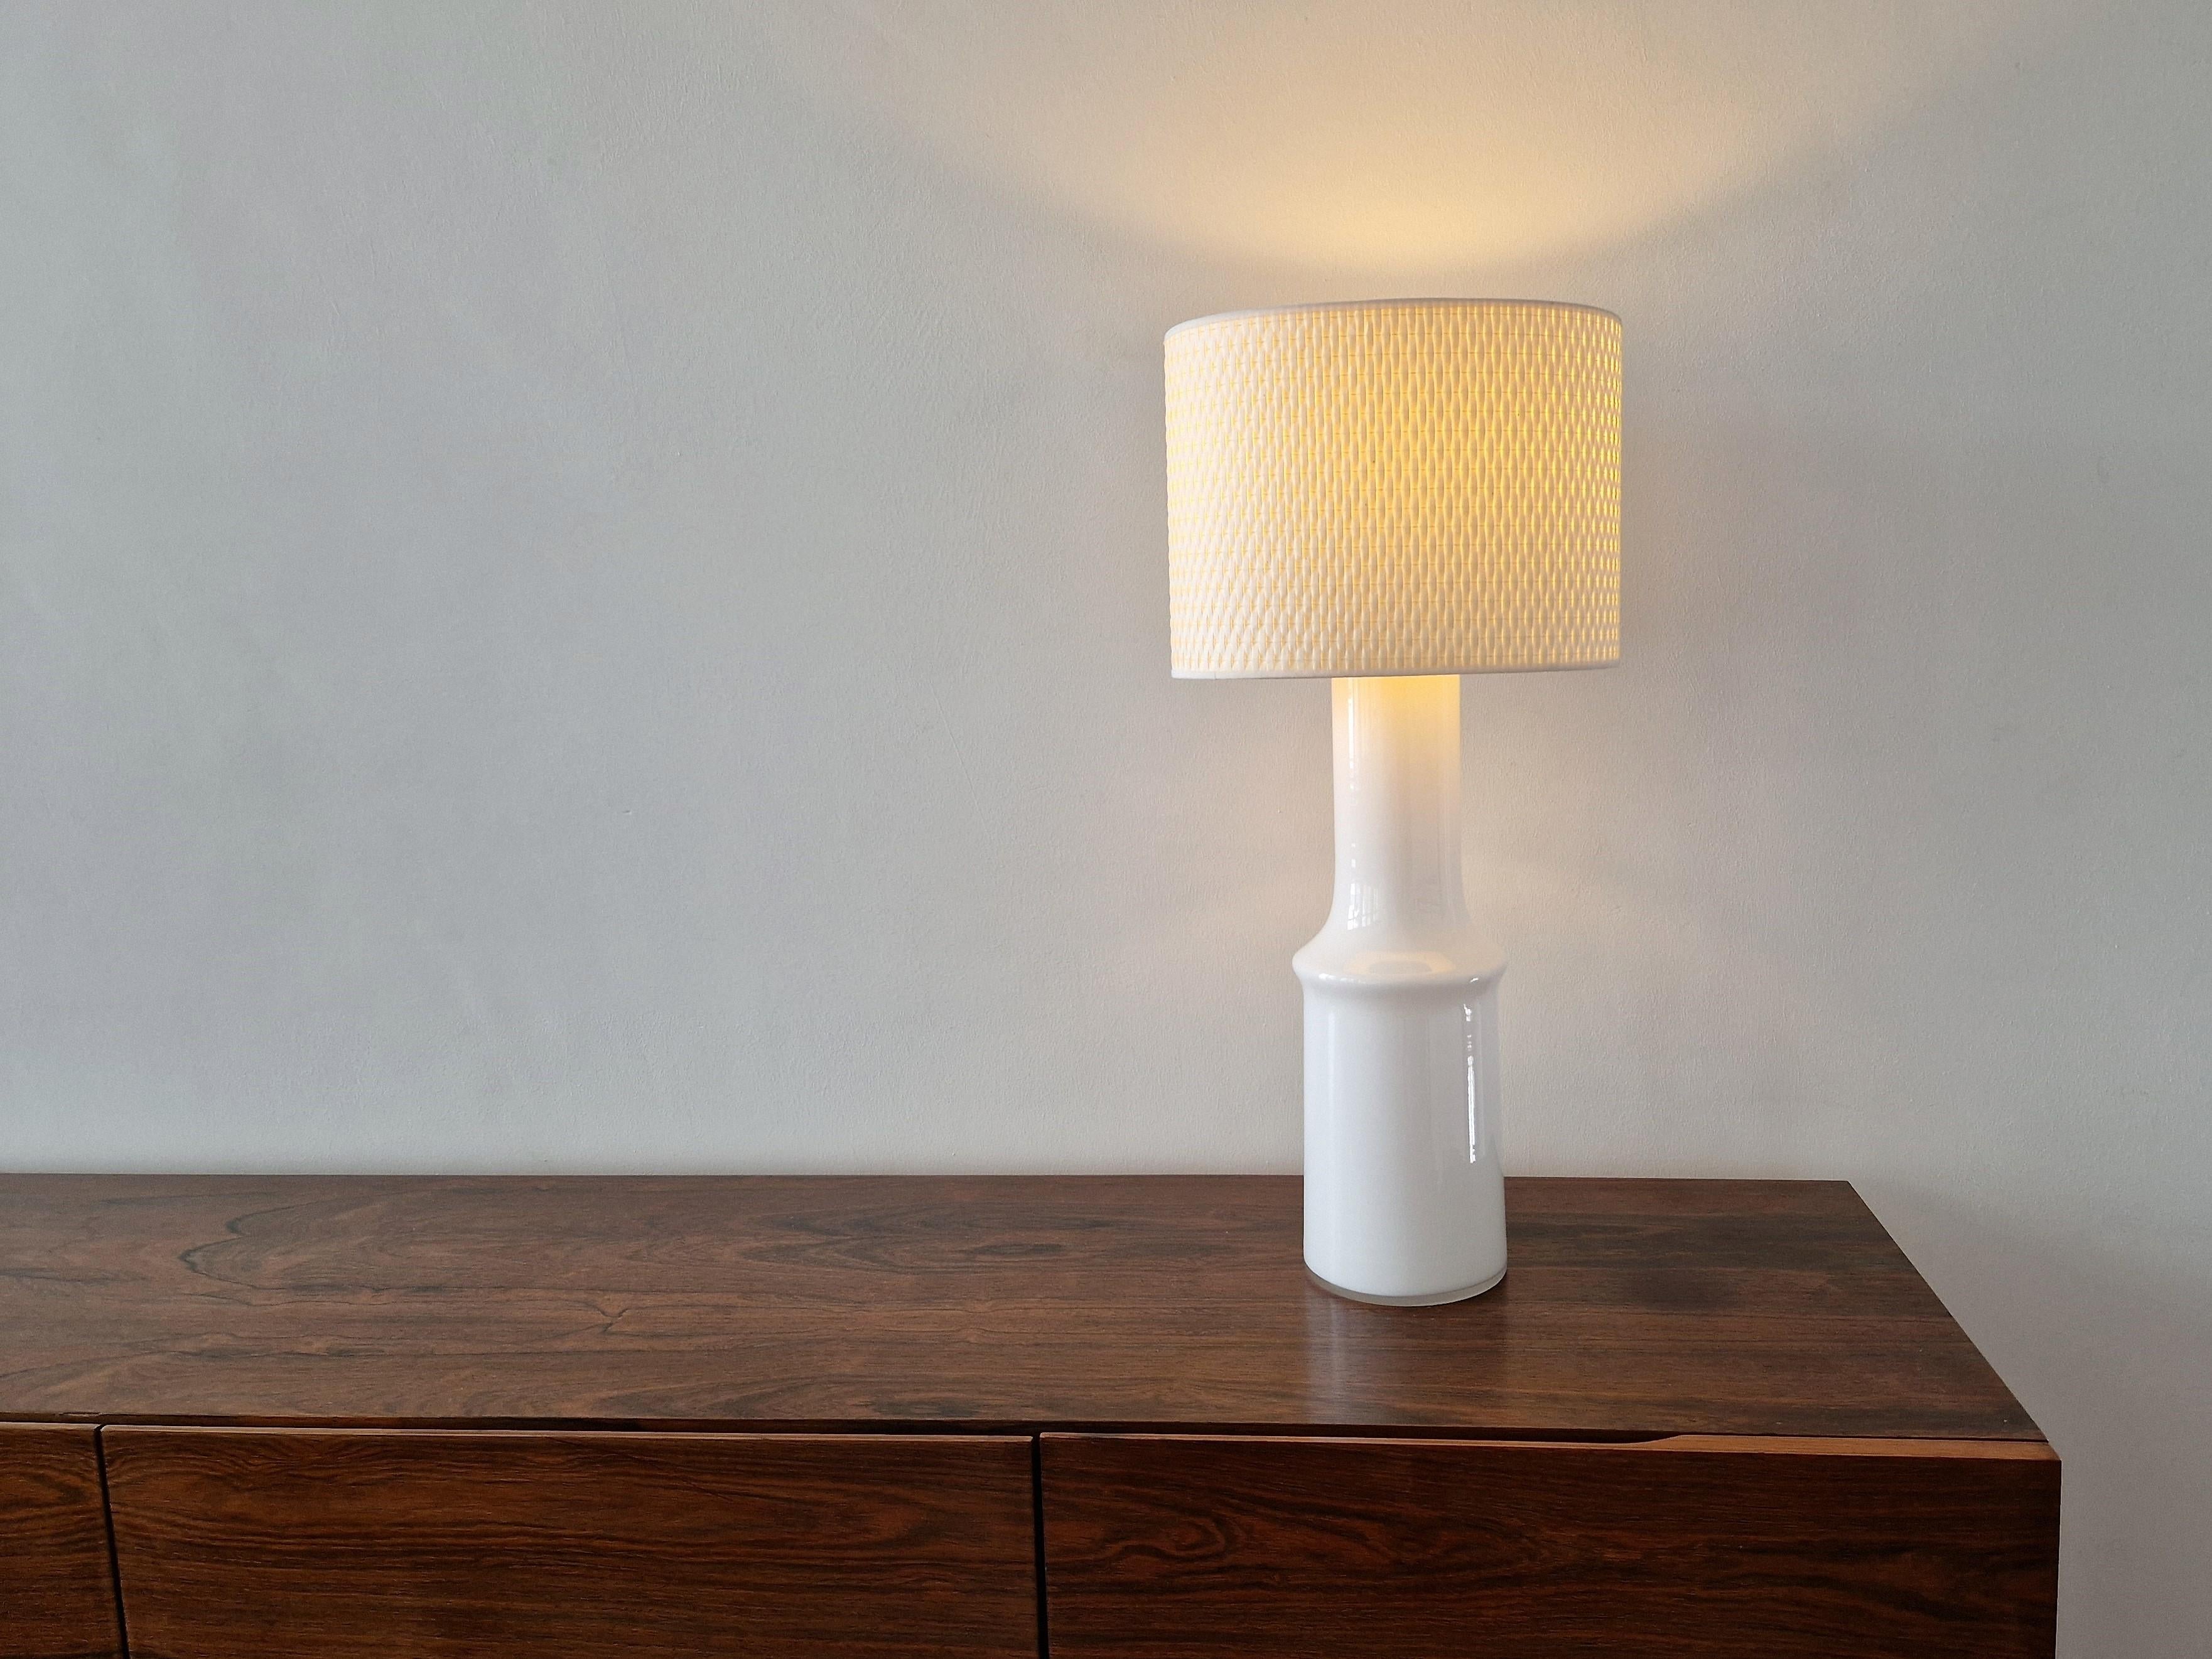 This large vintage table lamp was made by Hyllinge Glasswork in Sweden in the 1960's or early 1970's. A design by Gert Nyström. It is made of thick white colored glass, with a clear round glass top. The lamp is in a very good condition with hardly